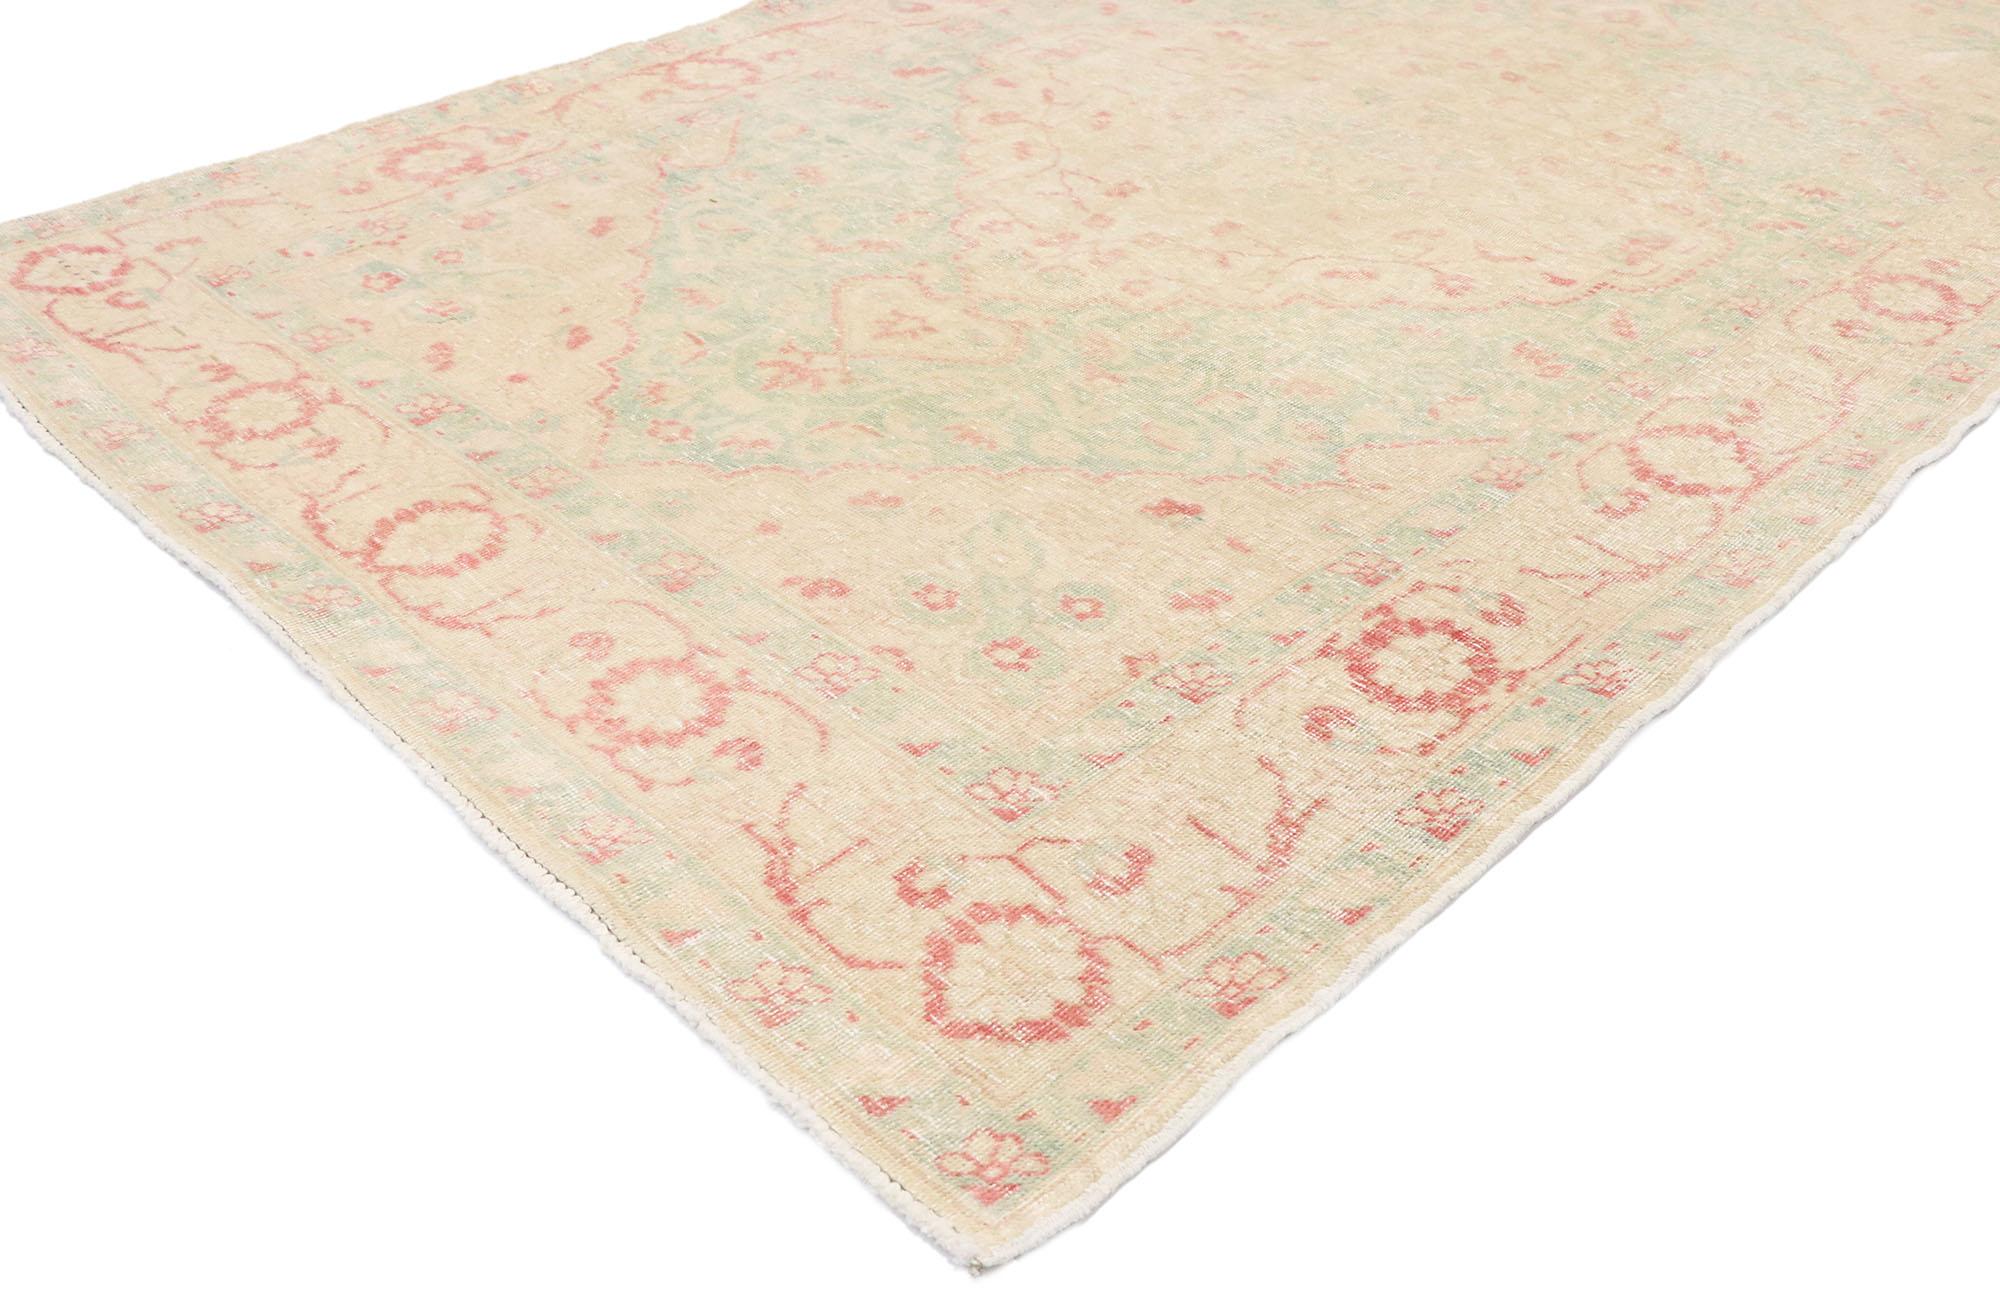 53471, vintage Turkish Sivas rug with Romantic English Country cottage style. With a timeless floral pattern and lovingly timeworn appearance with a hint of romantic connotations, this hand knotted wool distressed vintage Turkish Sivas rug